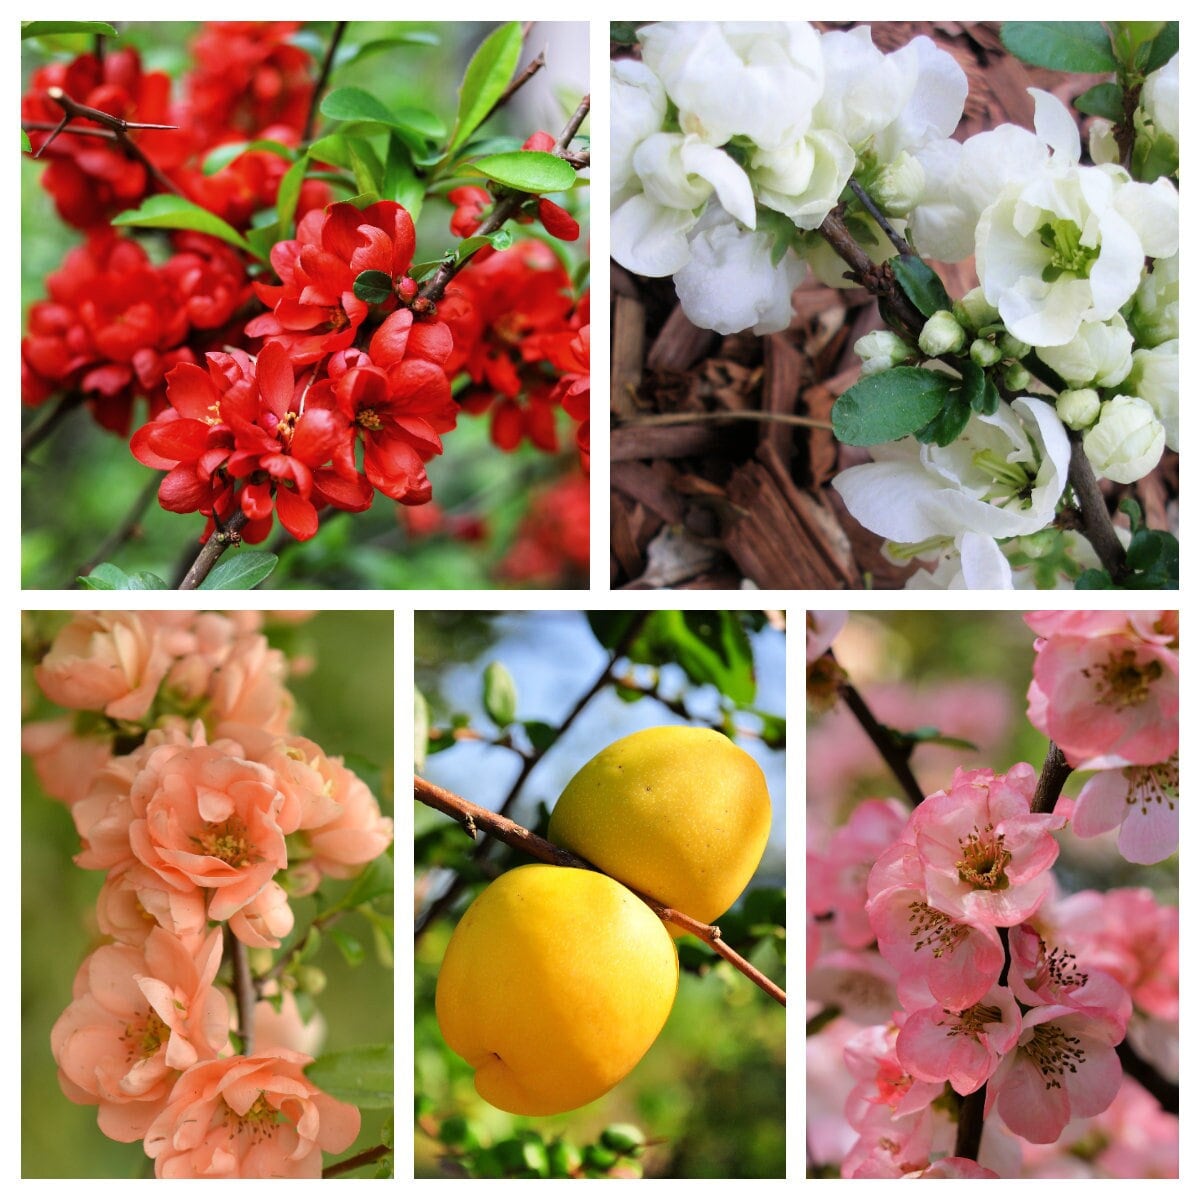 30 FLOWERING QUINCE Fruit Seeds - Pink Red White Orange Flowering Shrub - aka Japanese, Chinese, & Common Quince - Chaenomeles Speciosa